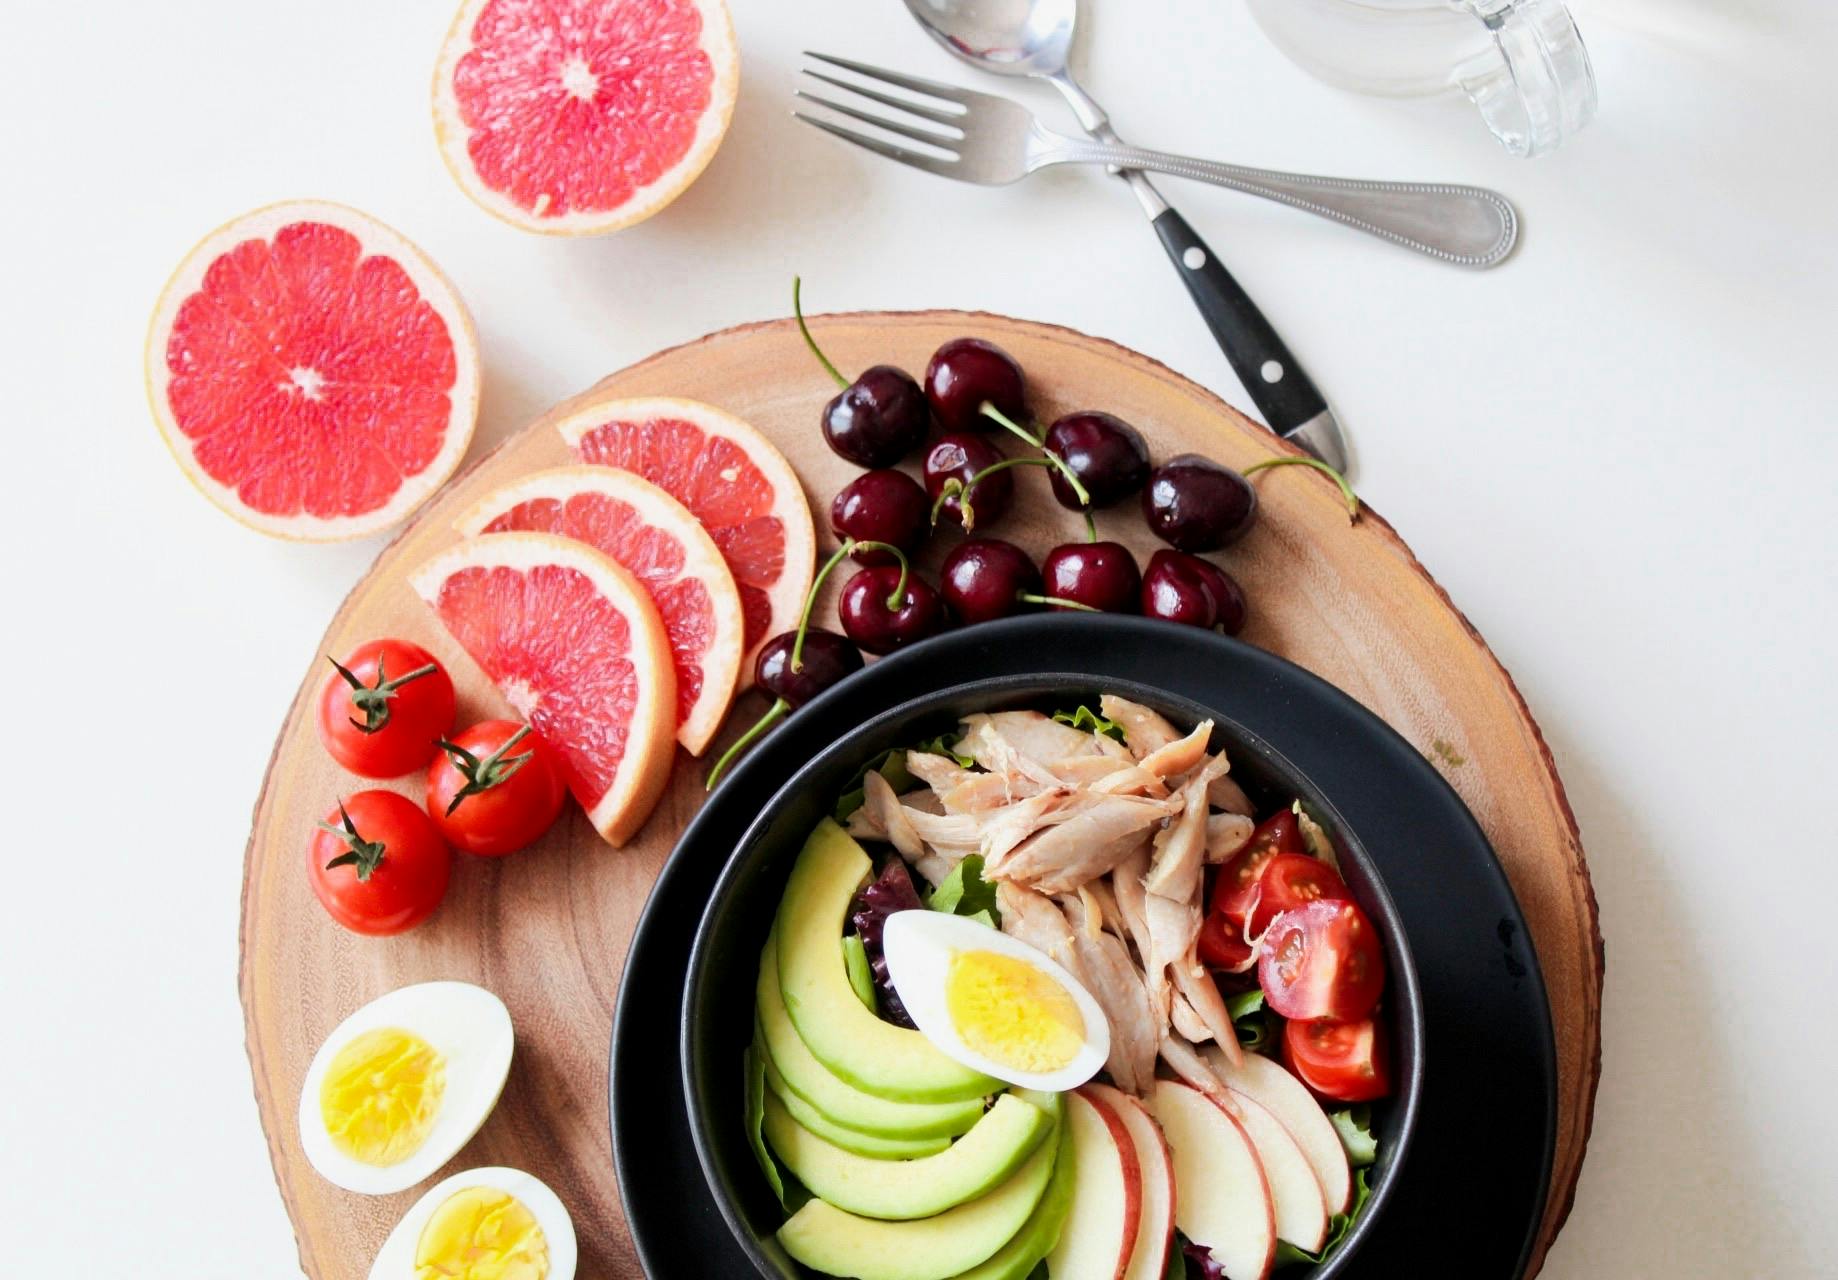 Fruit, boiled eggs, avocado, and chicken displayed in a bowl